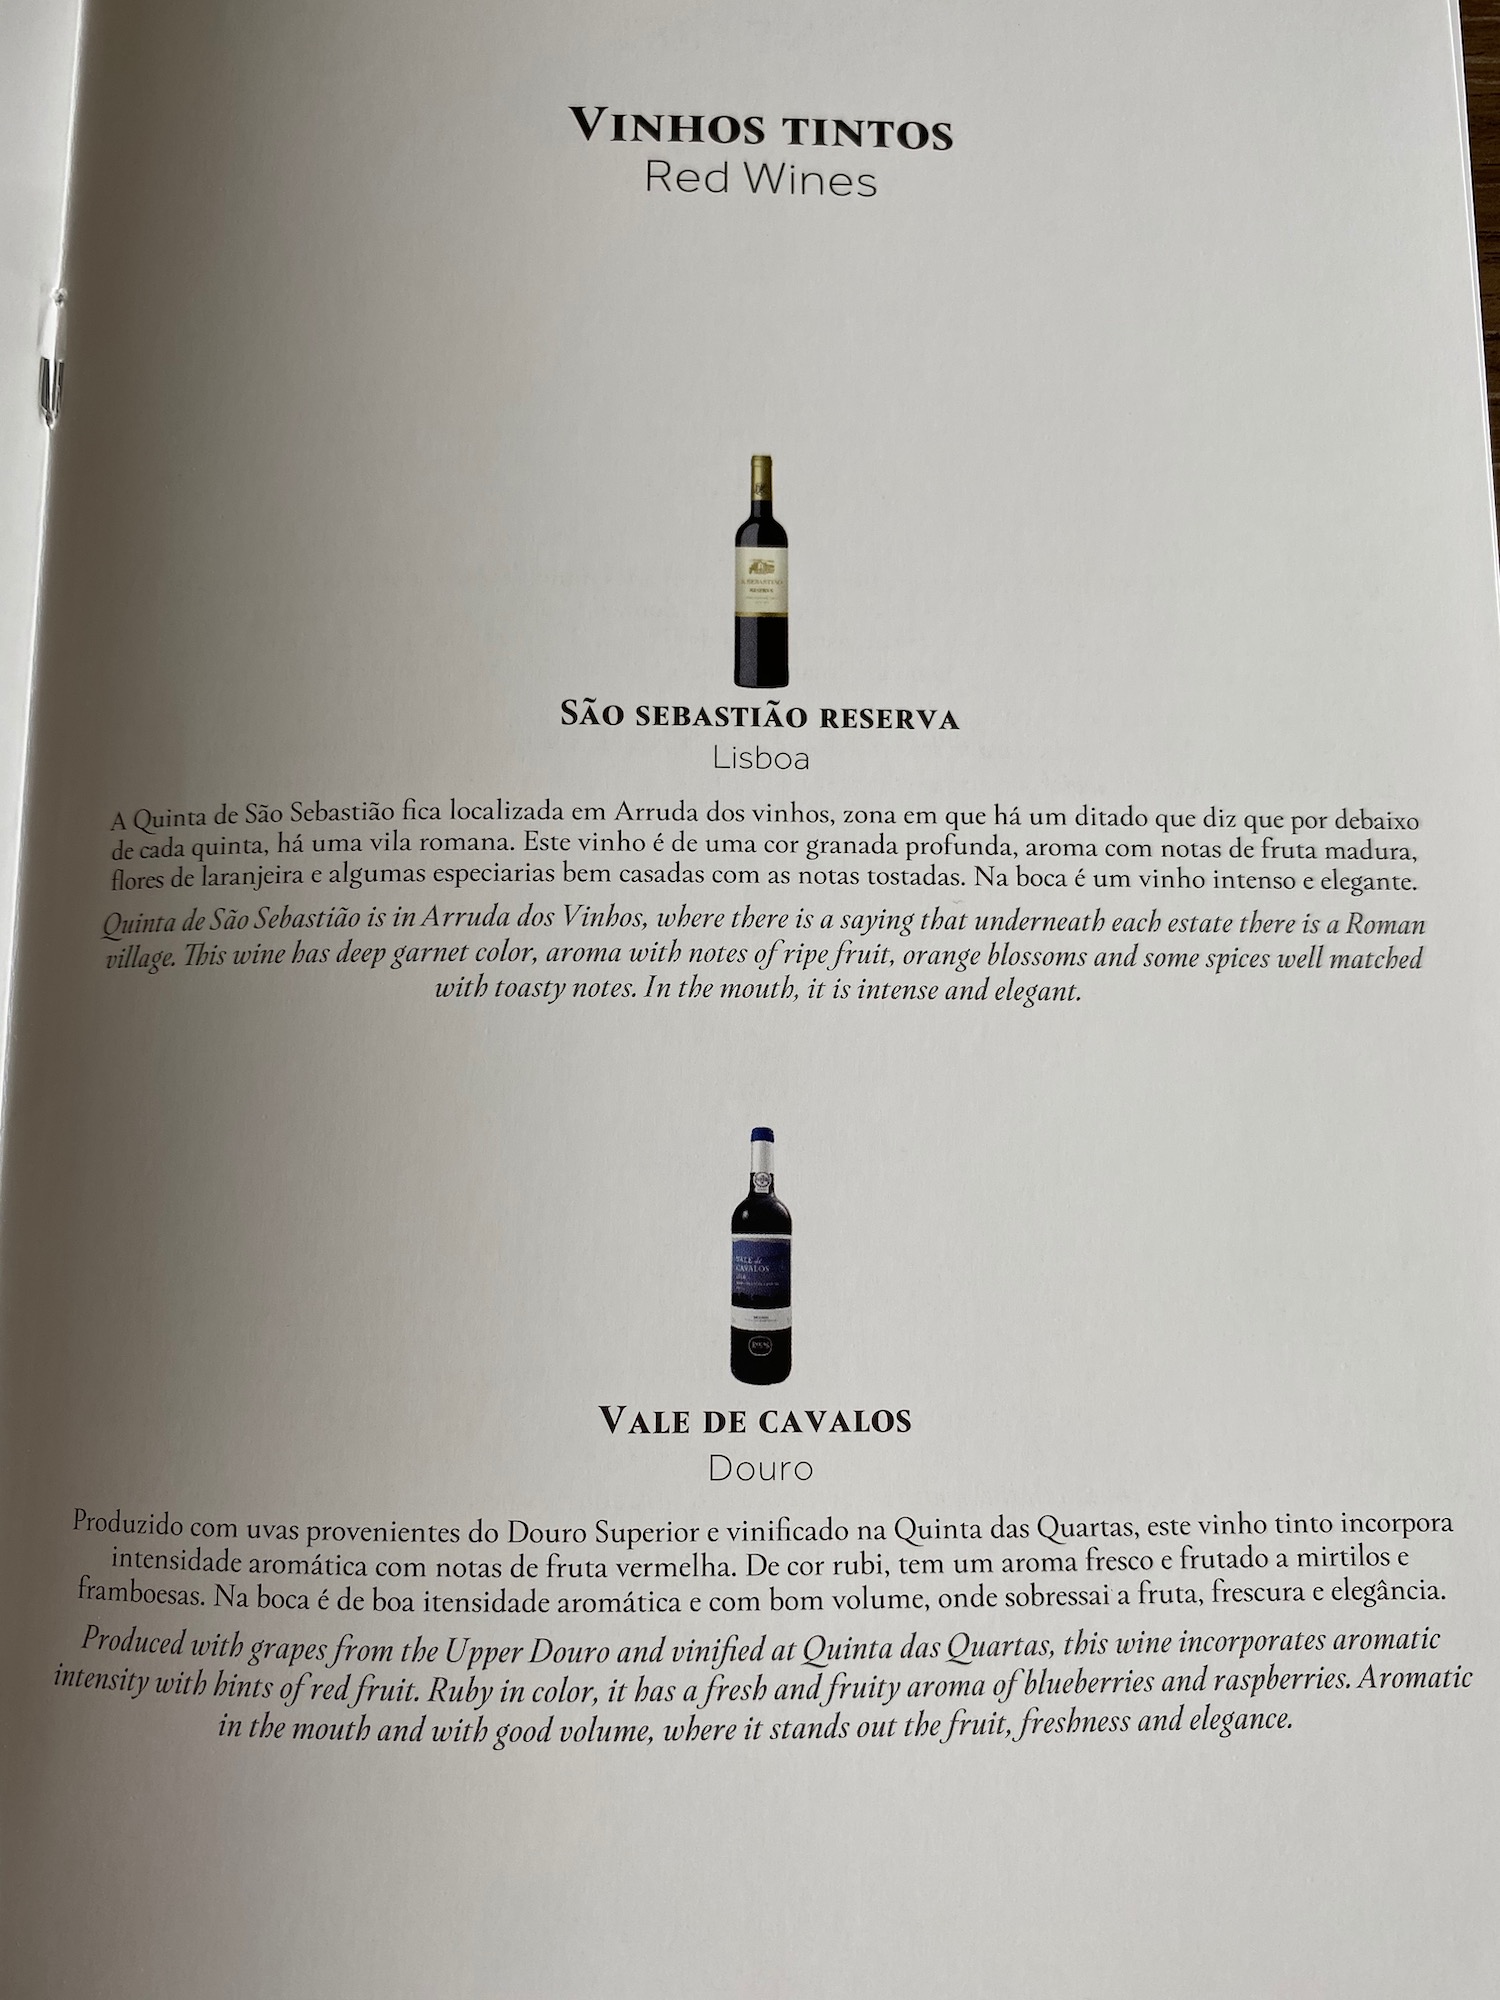 a book with text and bottles of wine